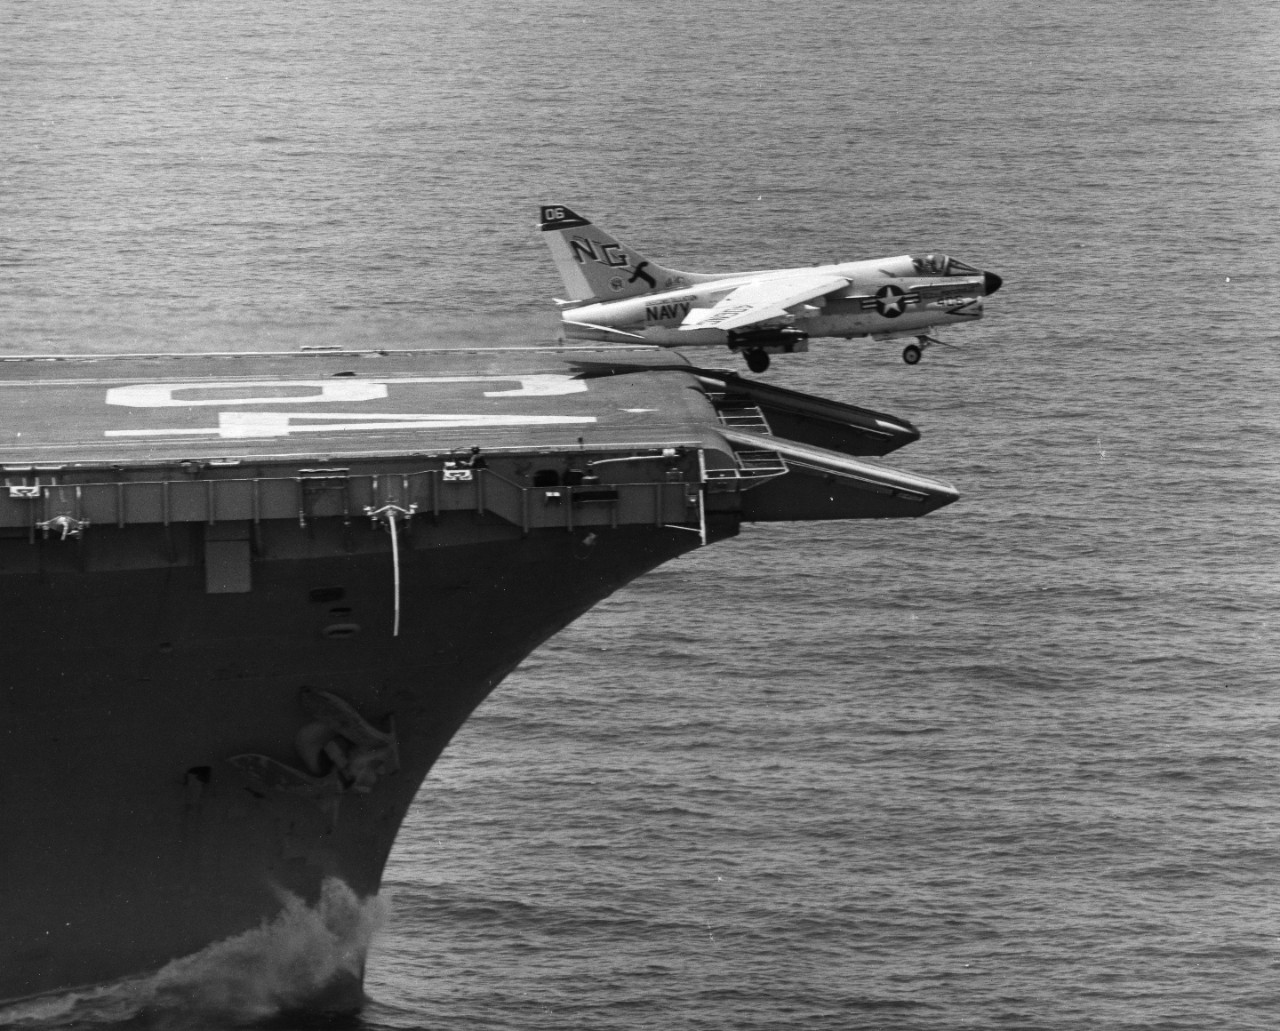 An Attack Squadron 147 (VA-147) A-7E Corsair II attack aircraft is launched from the port bow catapult of the attack aircraft carrier USS Constellation (CVA-64) in the South China Sea.